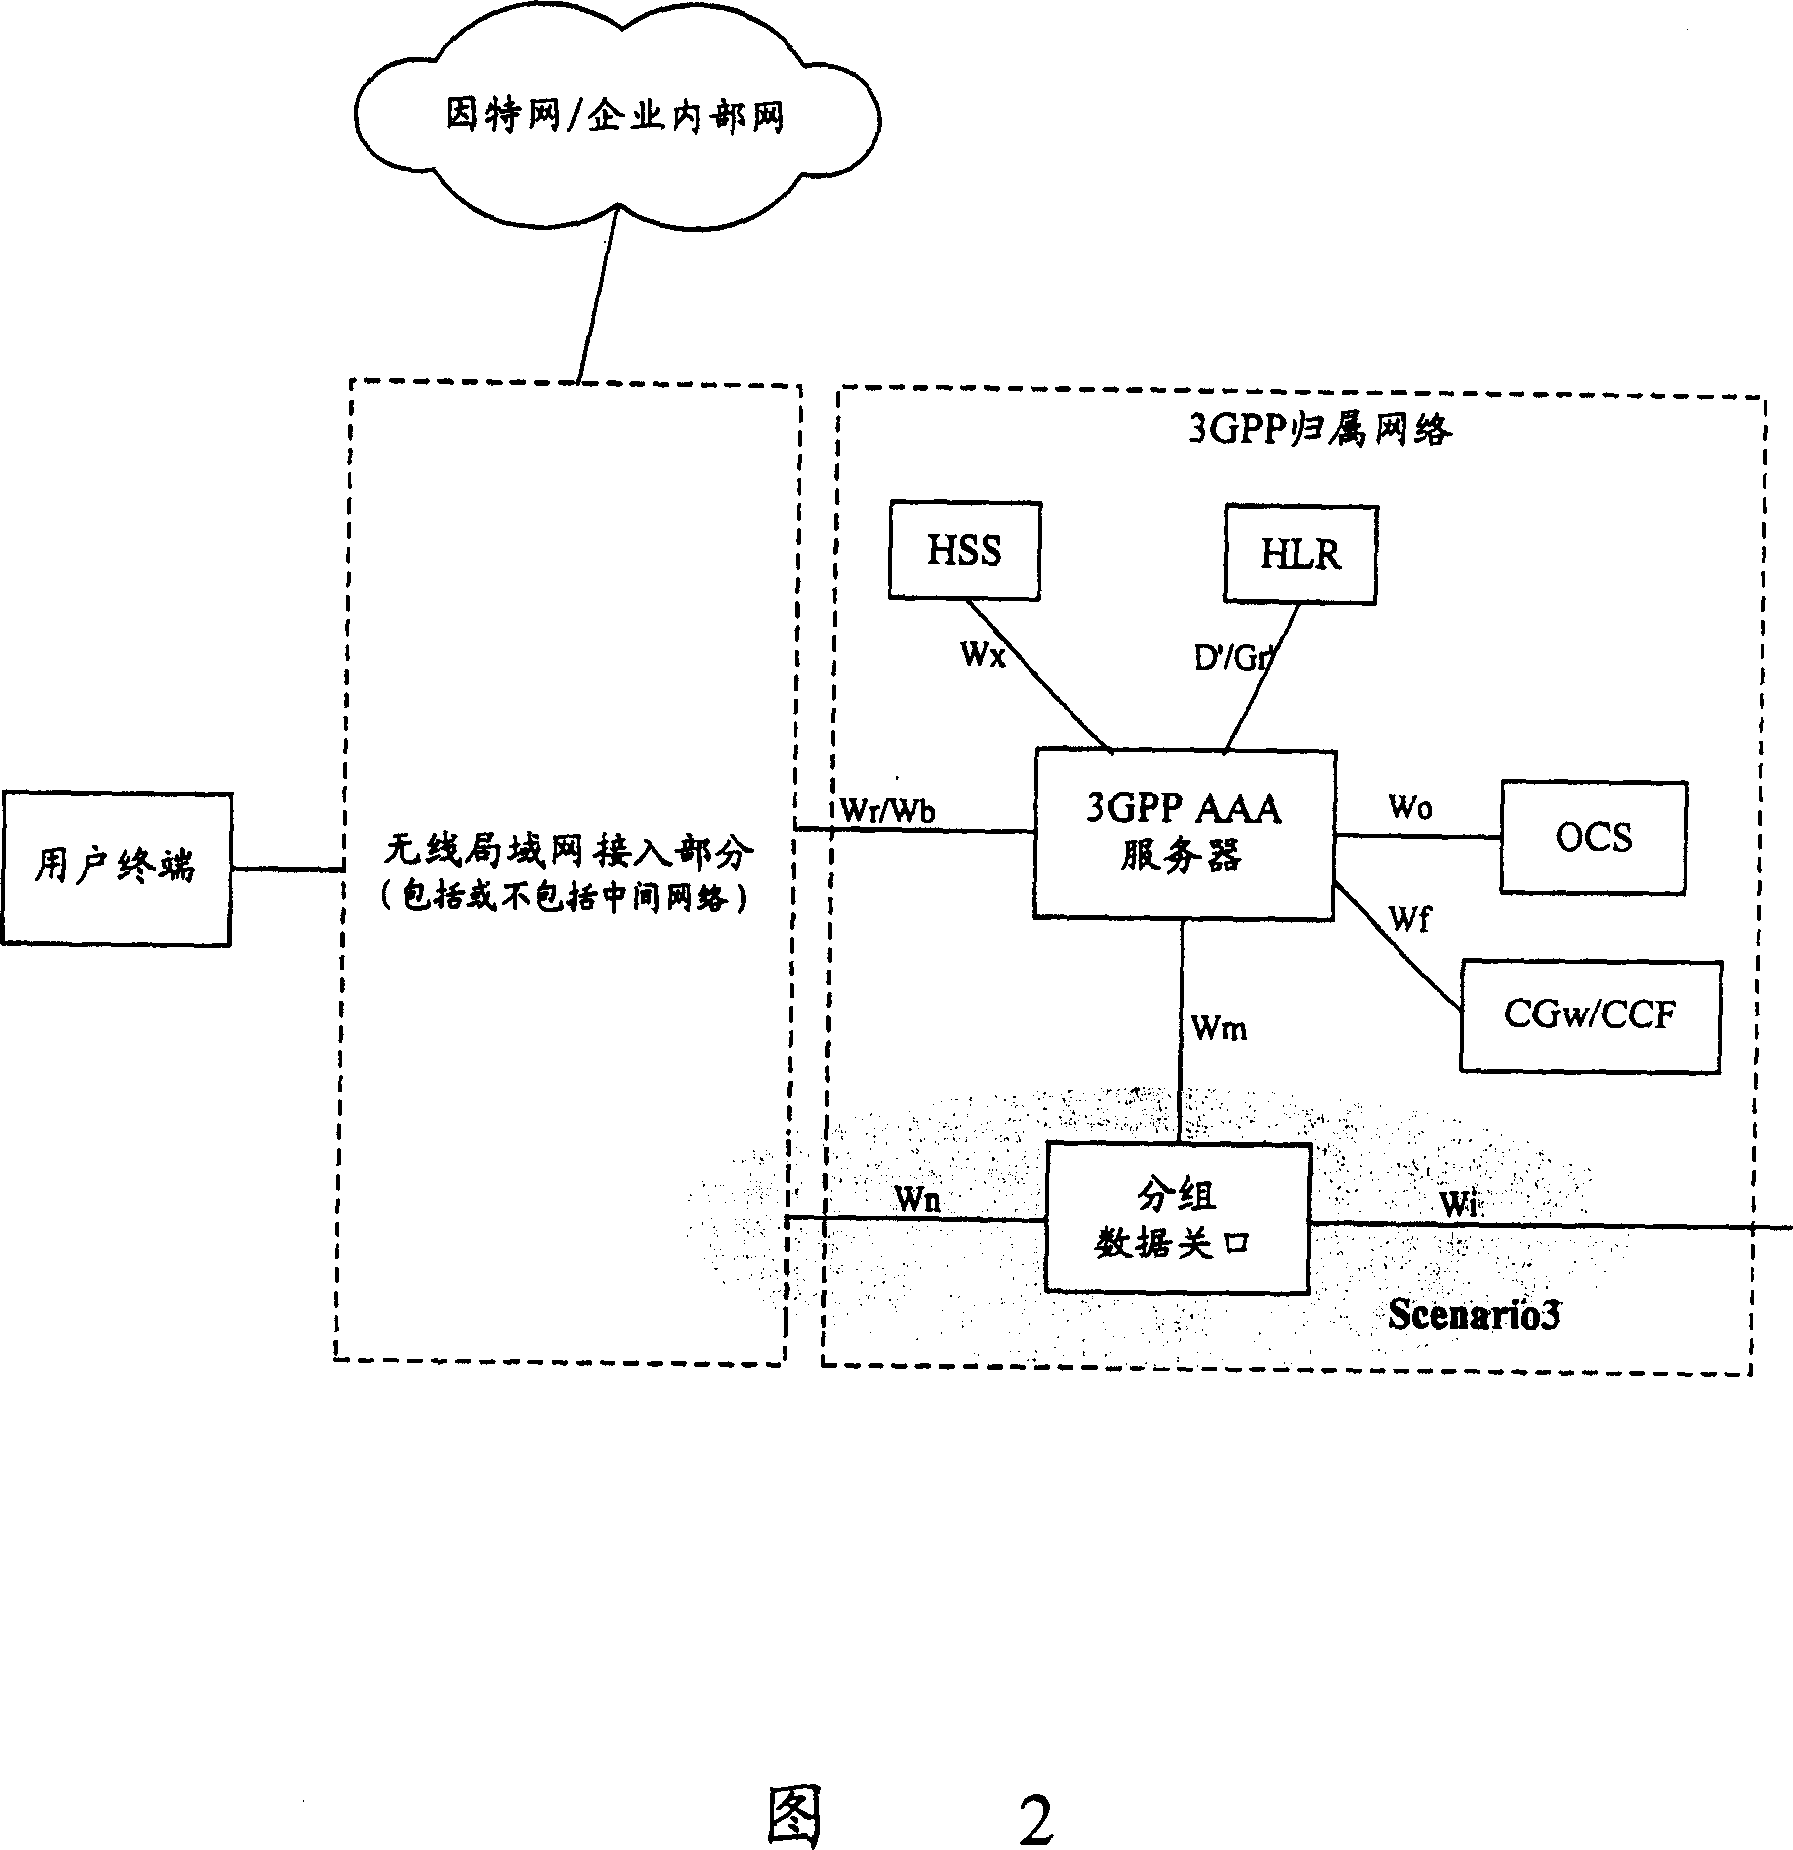 Interactive method for re-selecting operating network to wireless local network